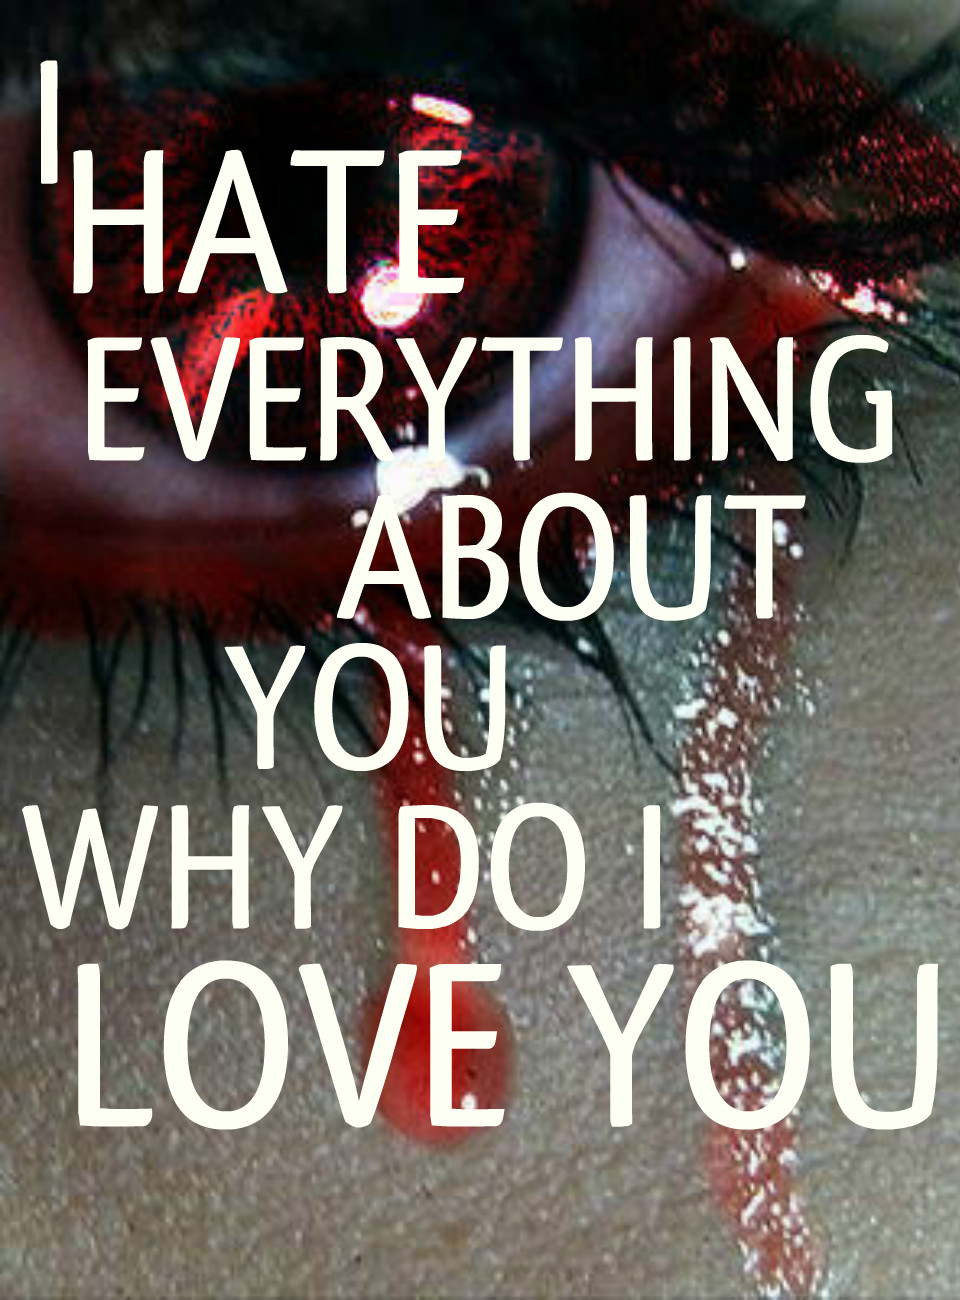 I Hate Everything About You Quotes. QuotesGram